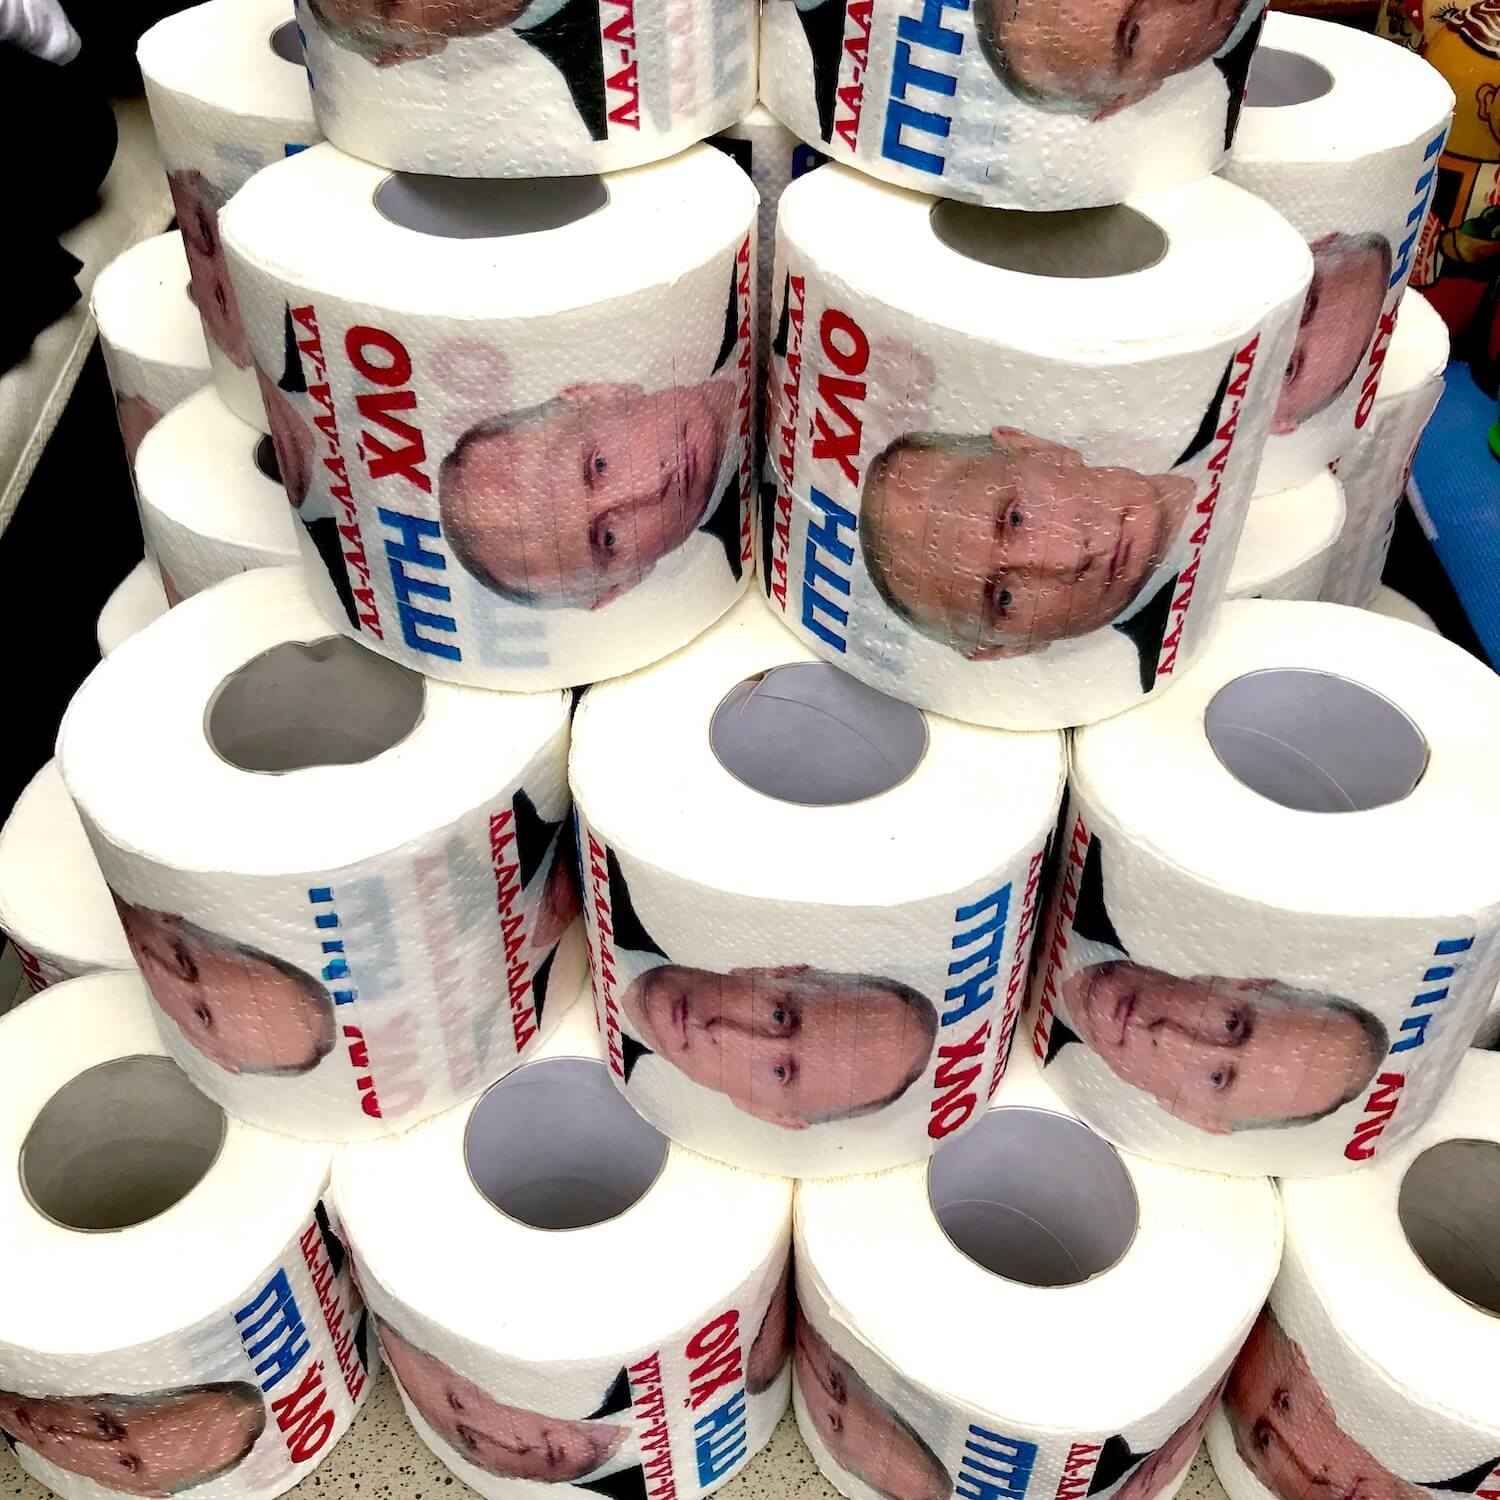 Items for sale at a street side vendor booth.  Here is a pyramid of toilet paper with Vladimir Putin's face. 